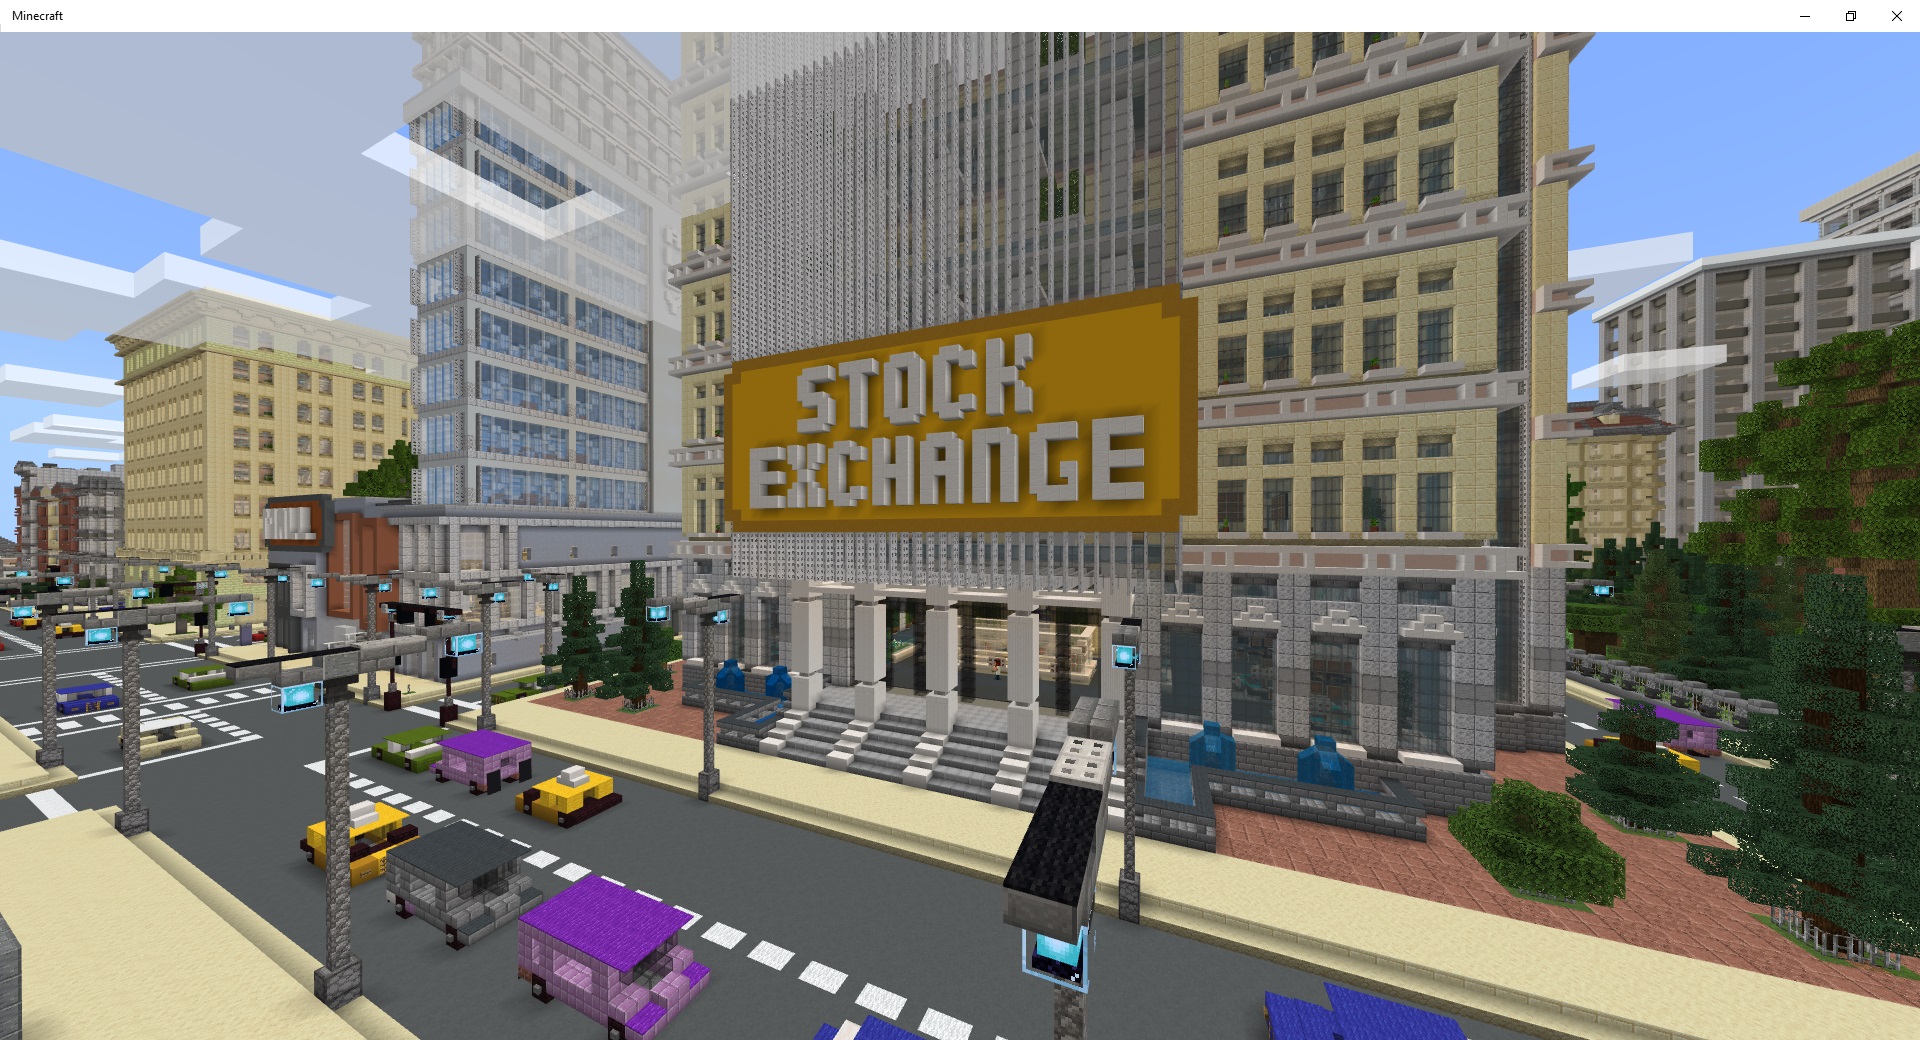 Fintropolis is an educational Minecraft world that teaches middle schoolers finance